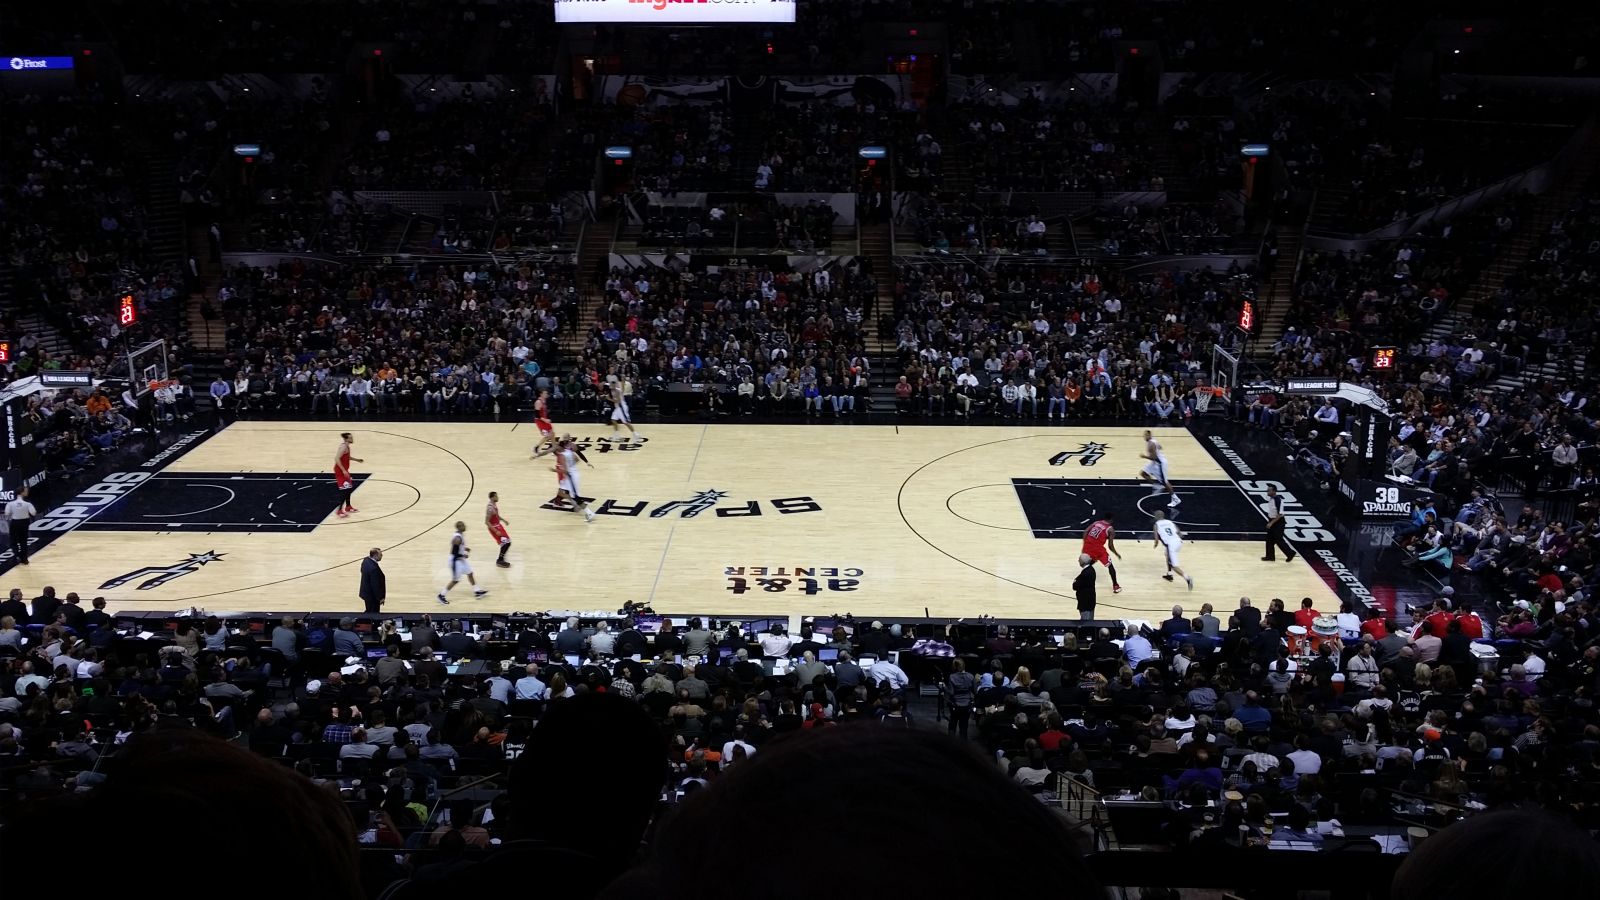 section 107, row 3 seat view  for basketball - at&t center